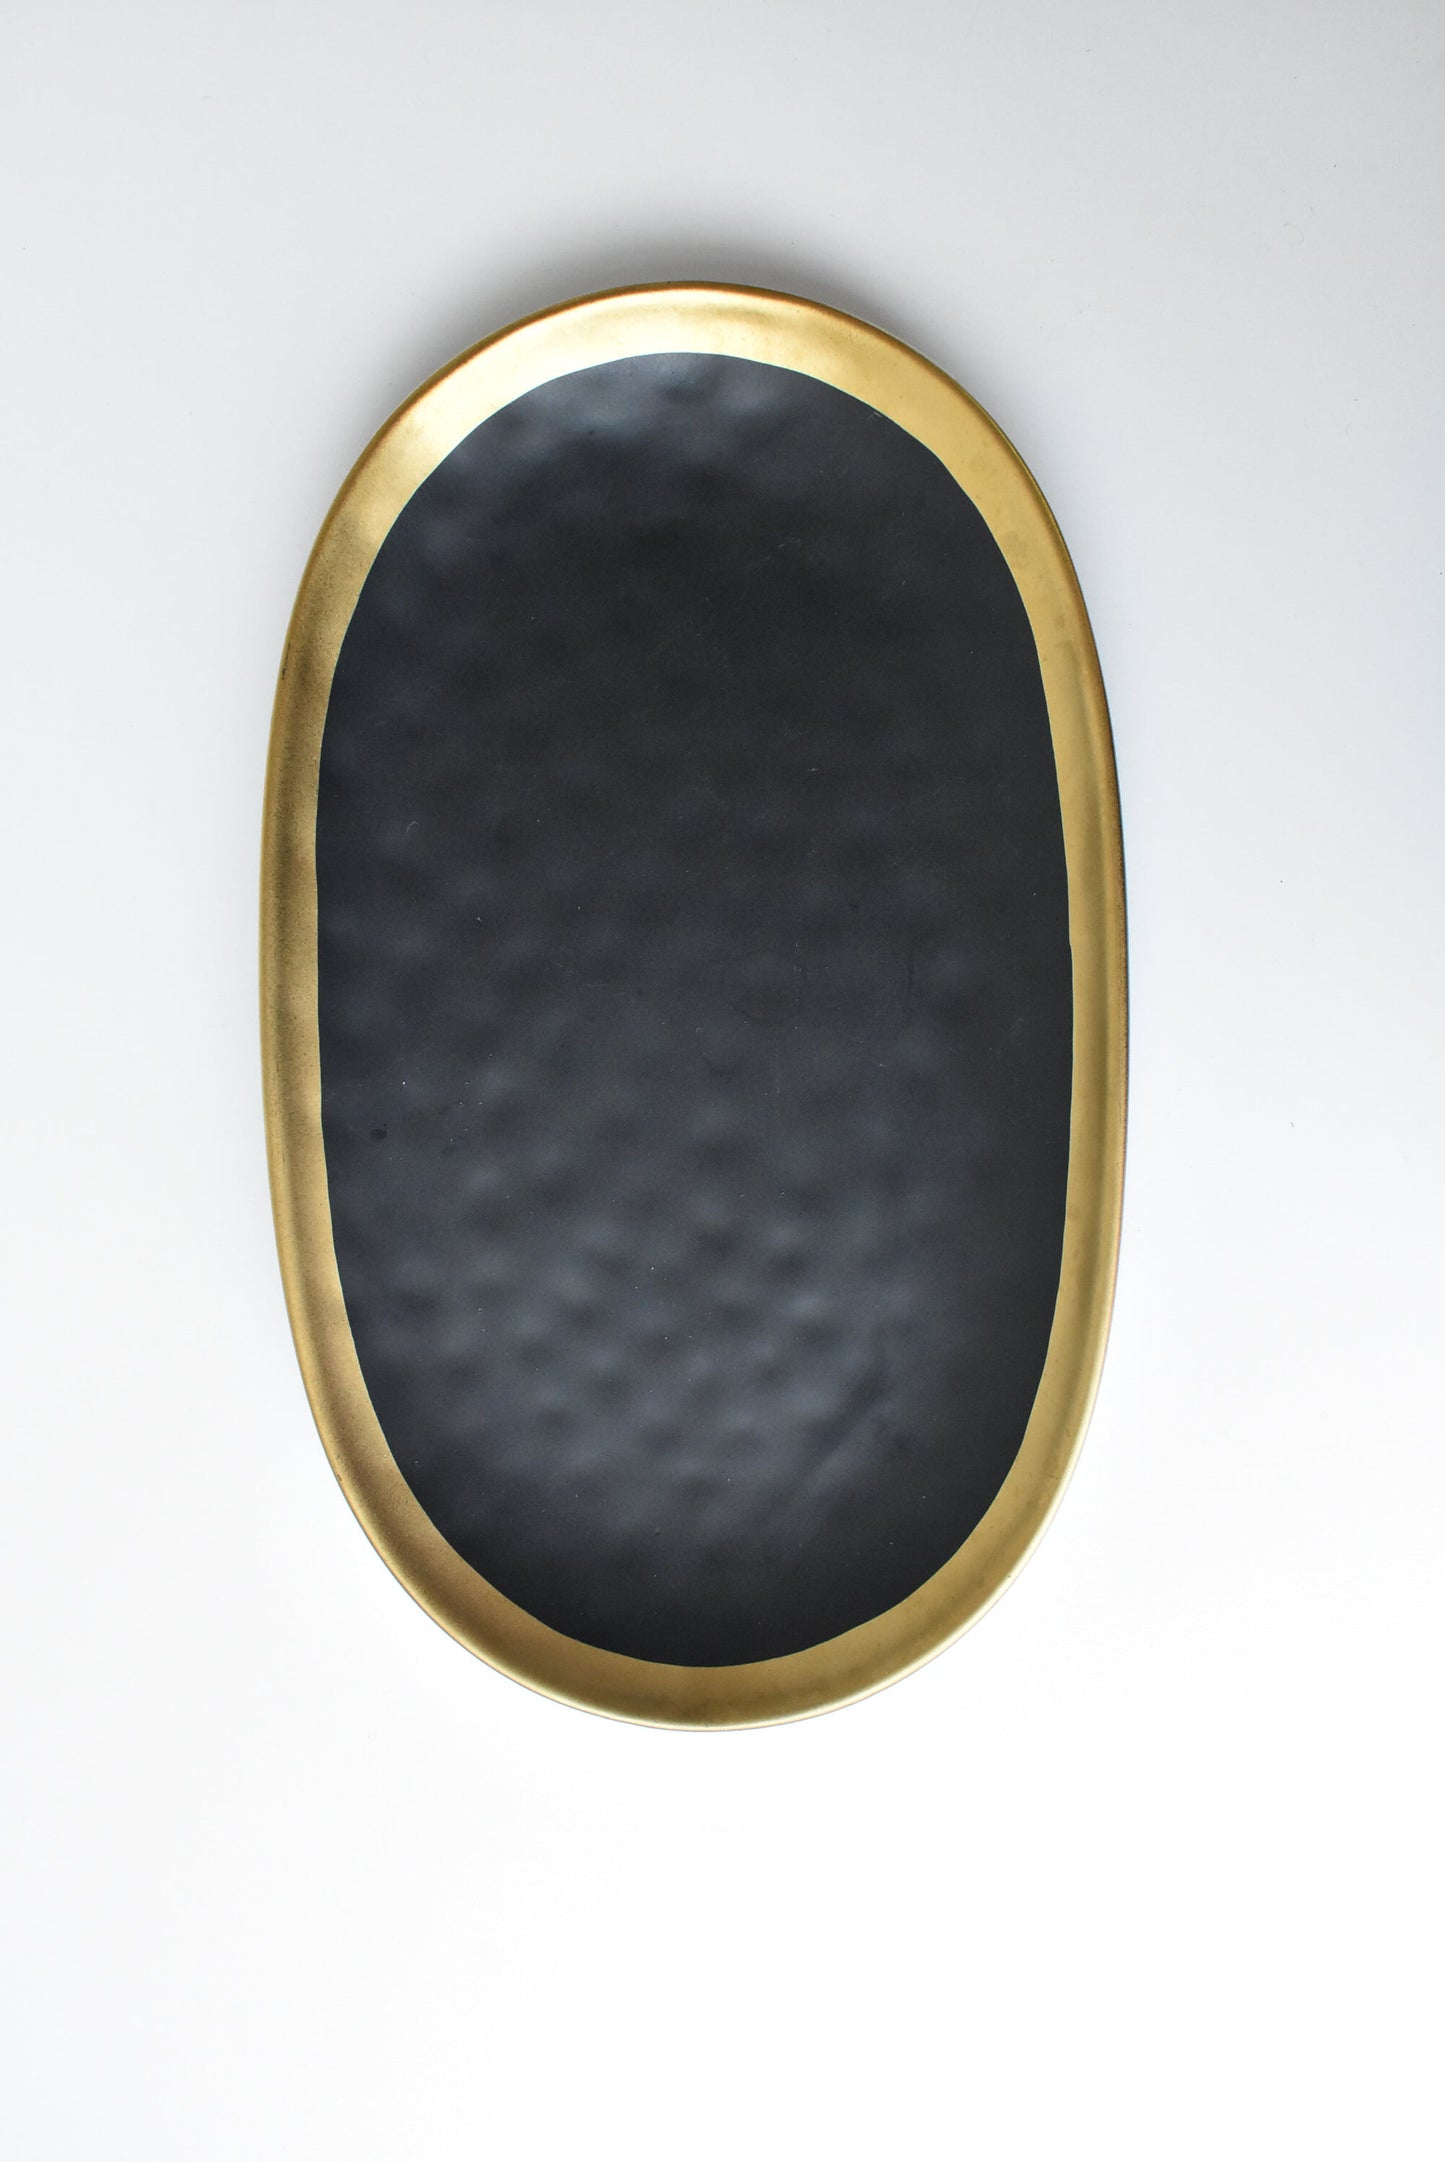 Maxwell & Williams porcelain black + gold plate